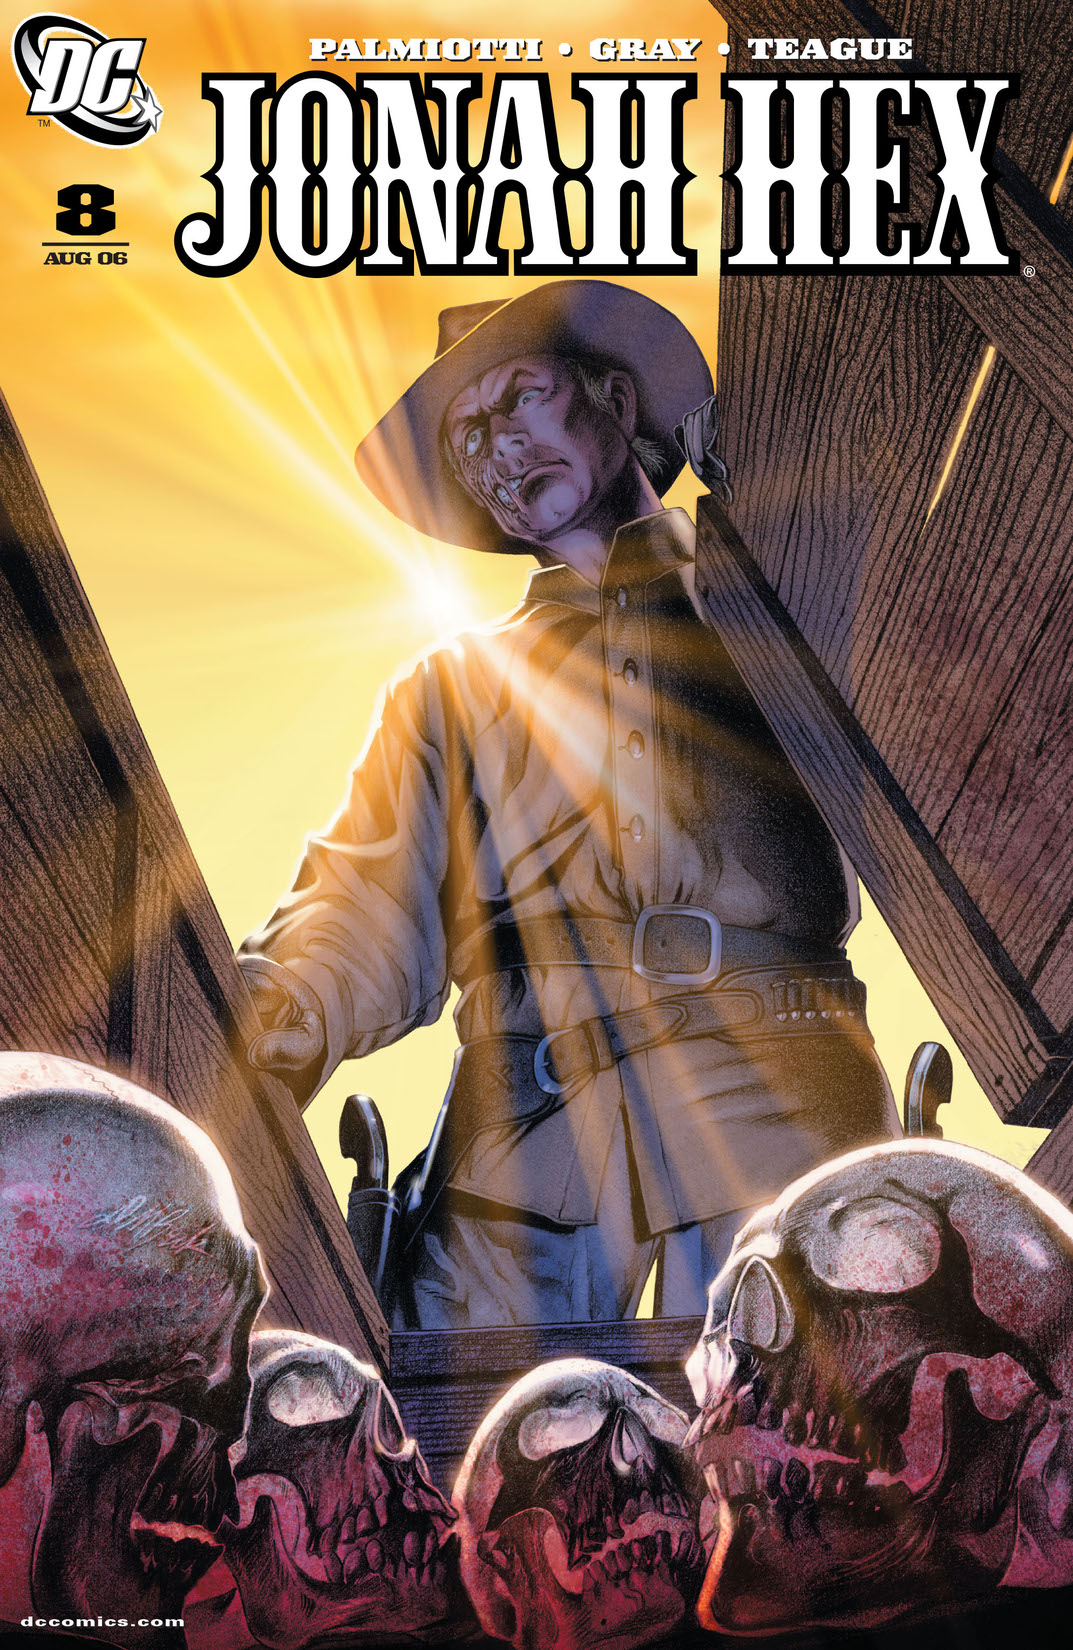 Jonah Hex #8 preview images